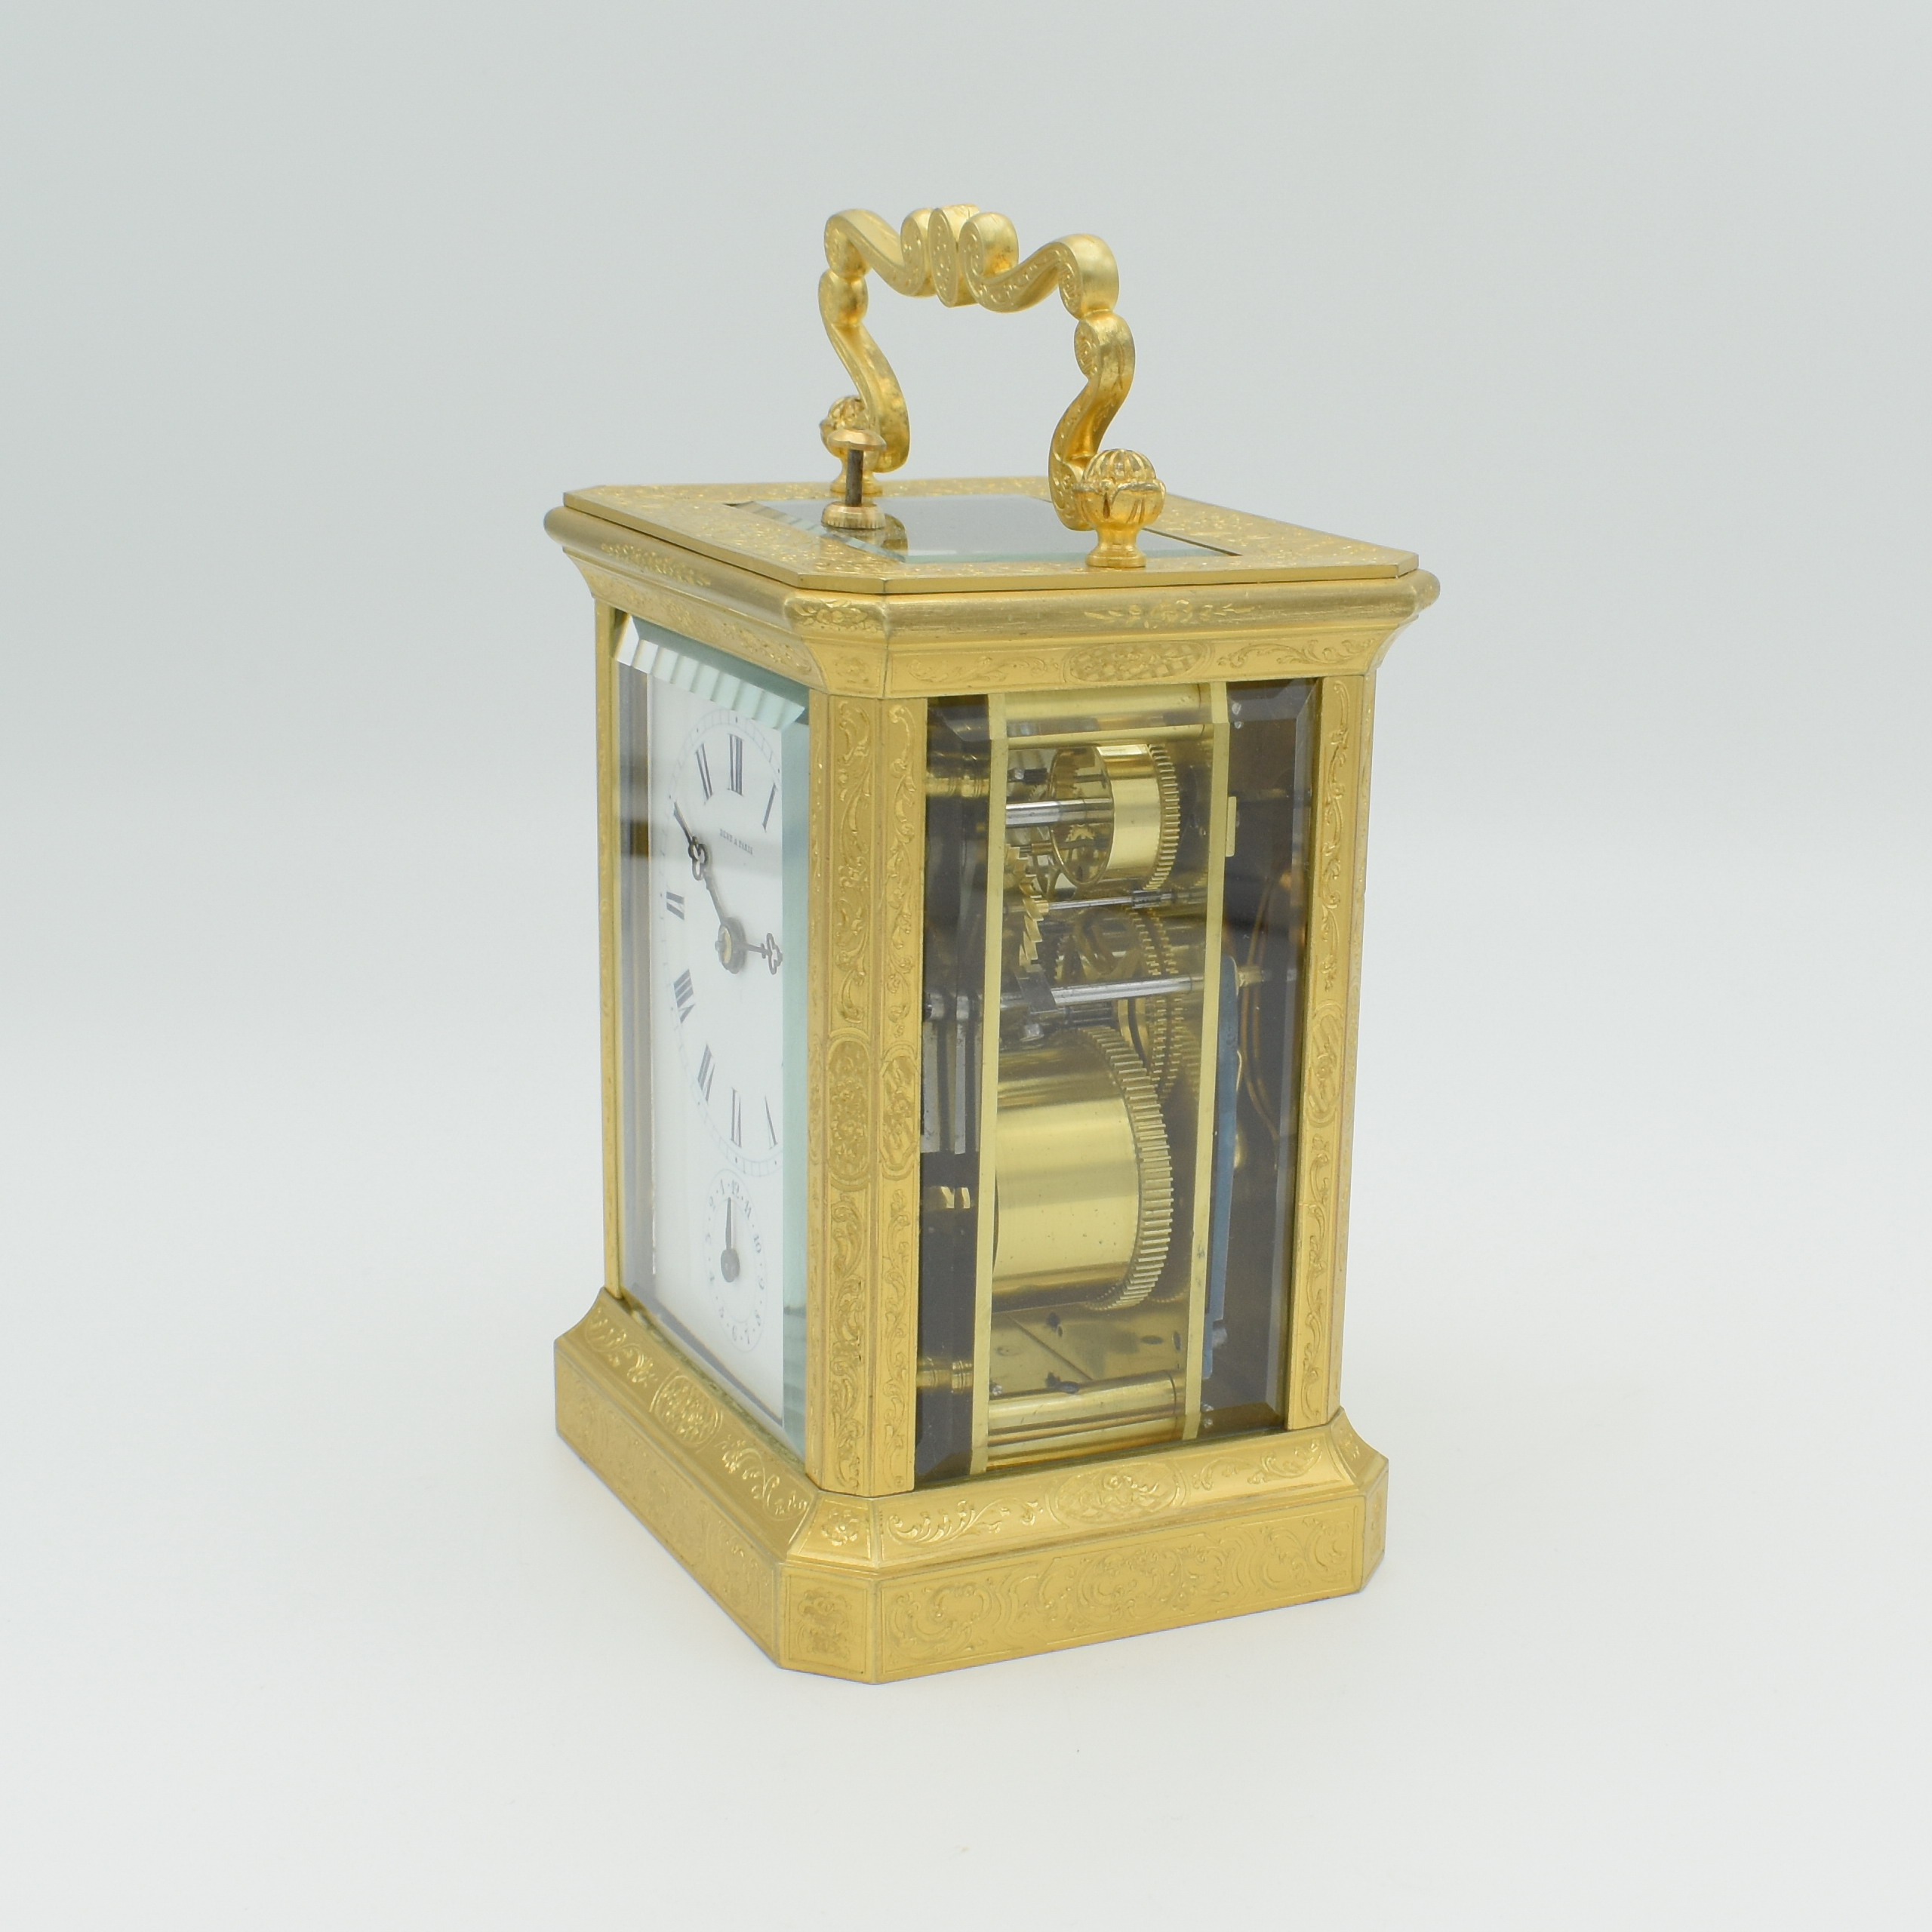 Early Garnier – Dent Carriage Clock – It's About Time